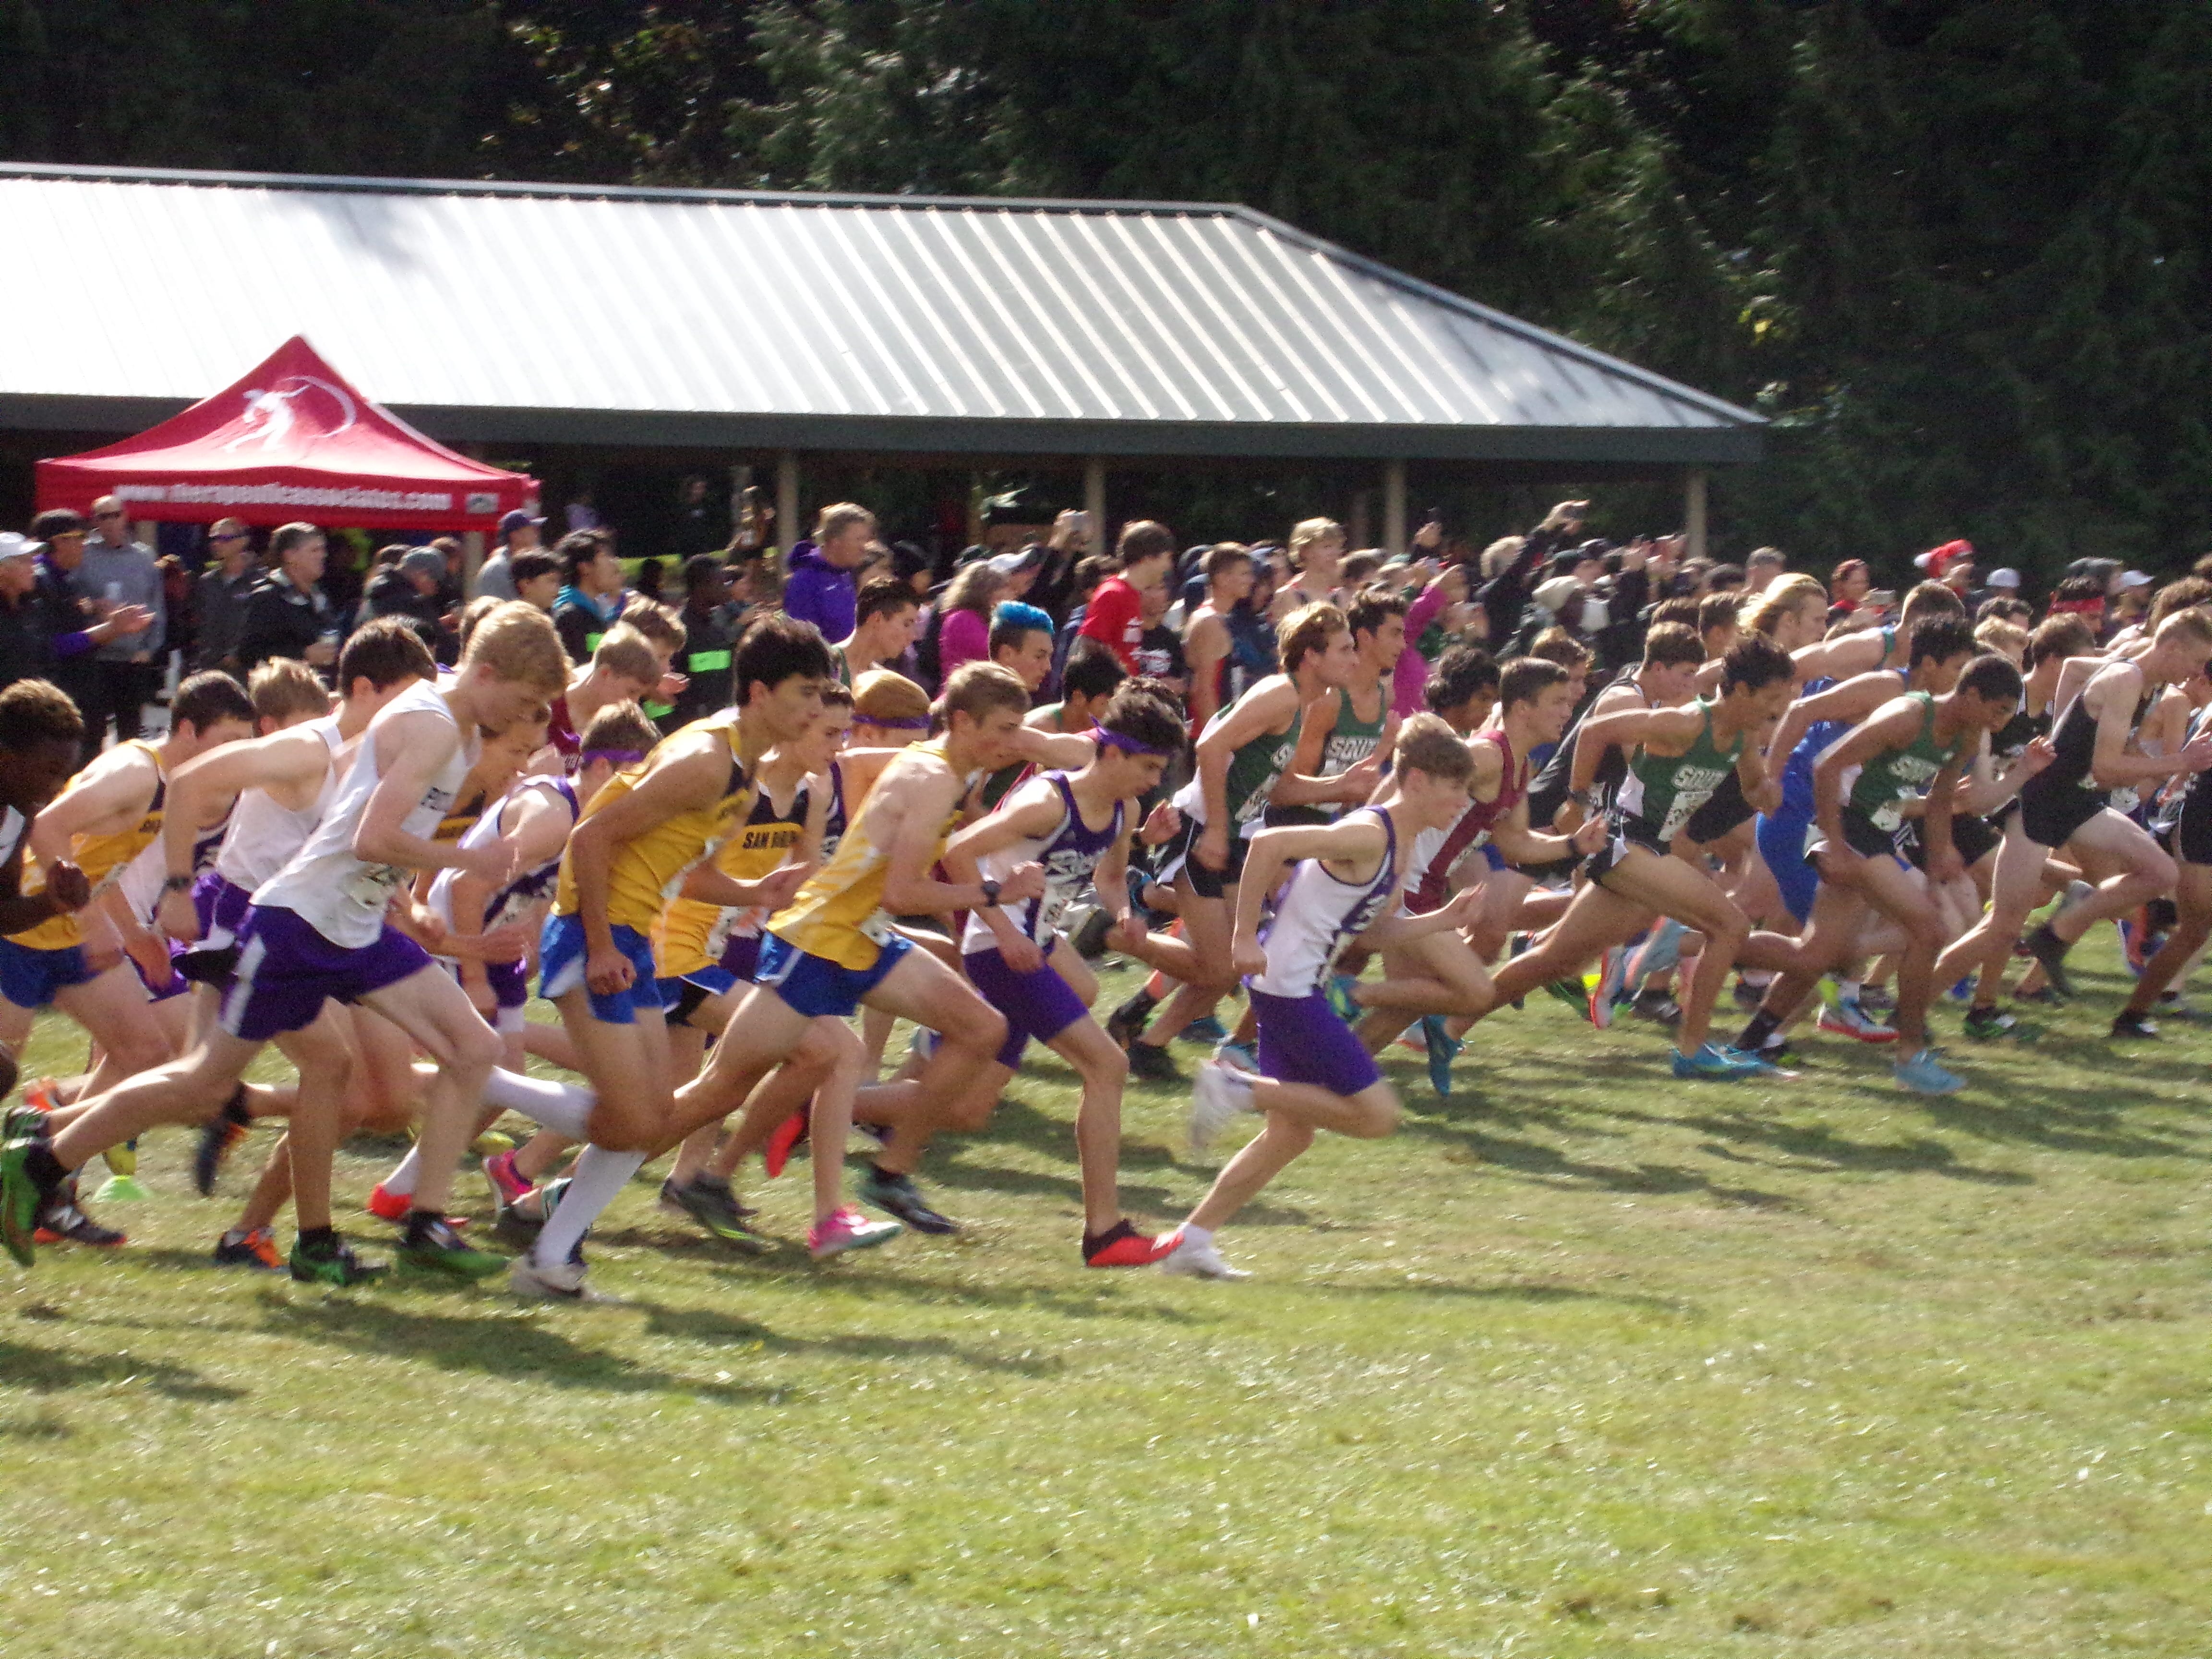 Runners take off from the start line of the Division I boys race at Nike Portland XC cross country meet at Blue Lake Regional Park in Fairview, Ore.